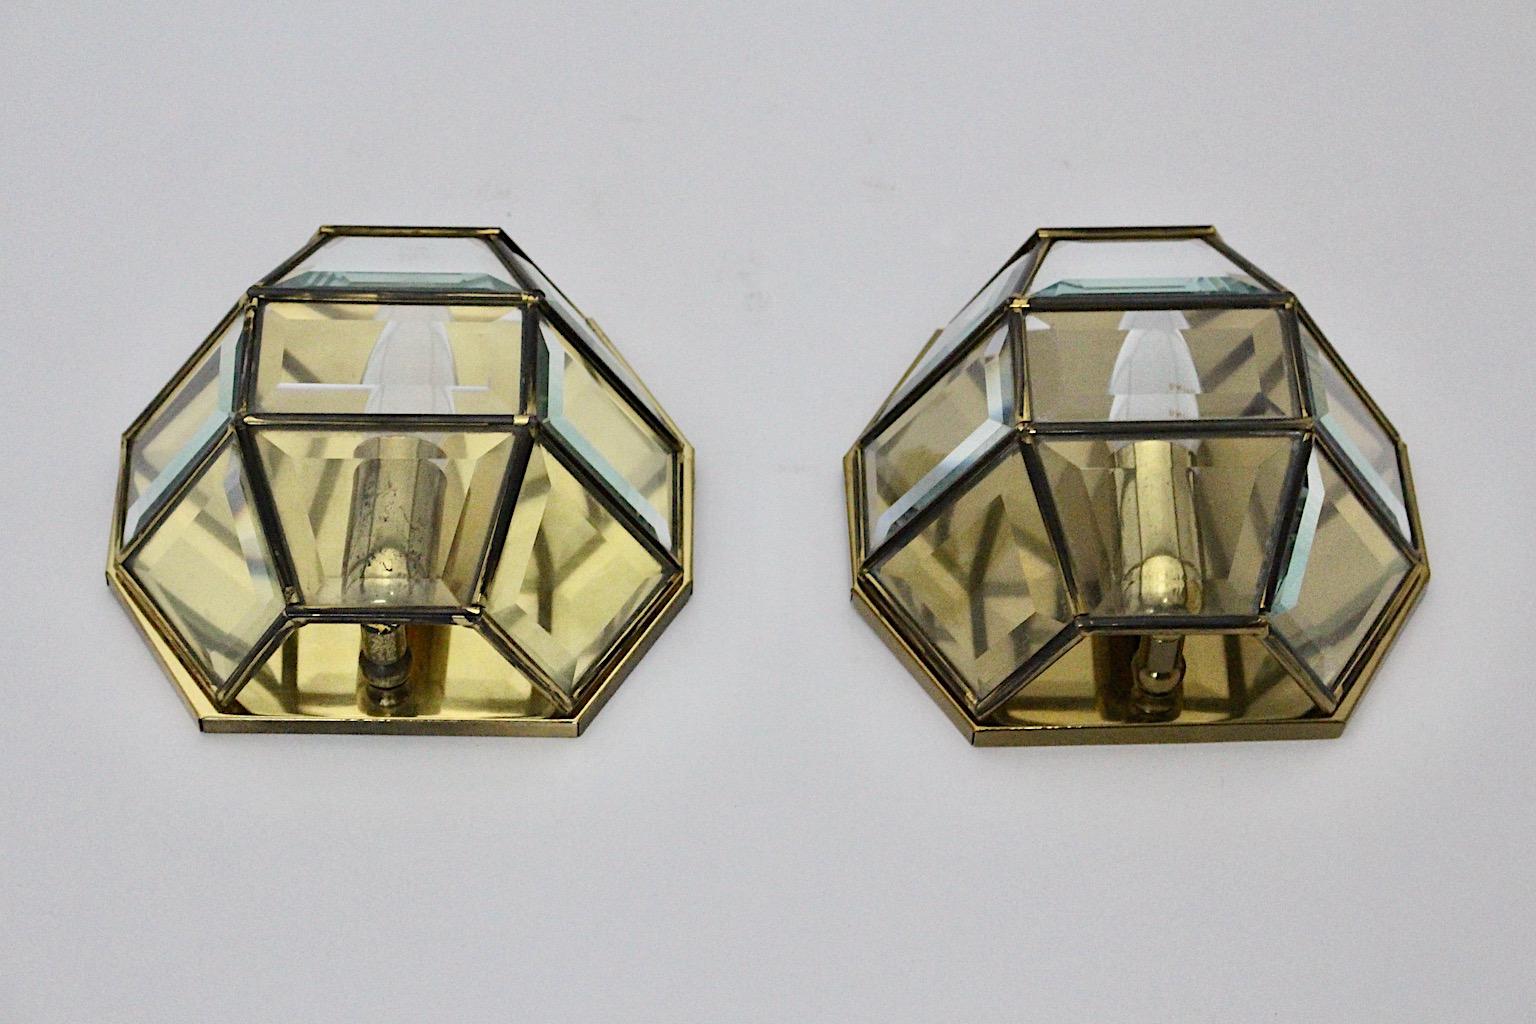 Jugendstil Style Adolf Loos Style Sconces Wall Lights Brass Glass 1970s In Good Condition For Sale In Vienna, AT